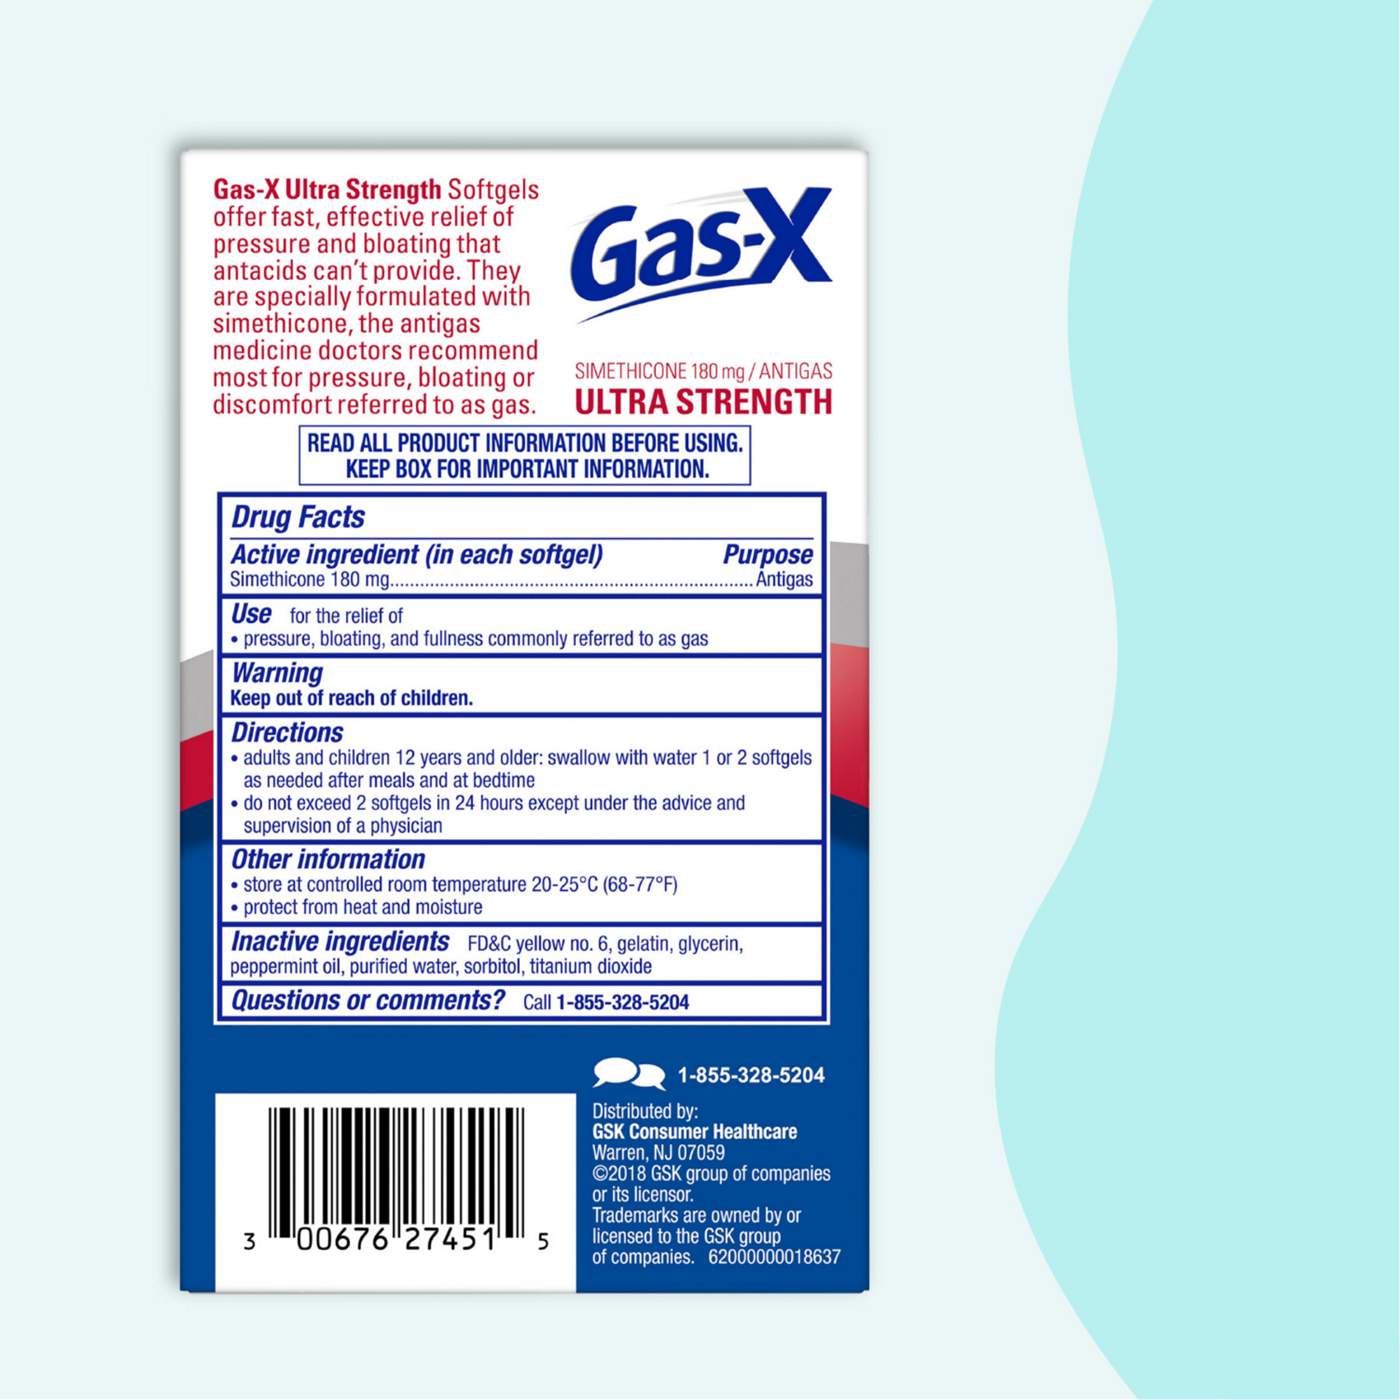 Gas-X Ultra Strength Softgels; image 7 of 9